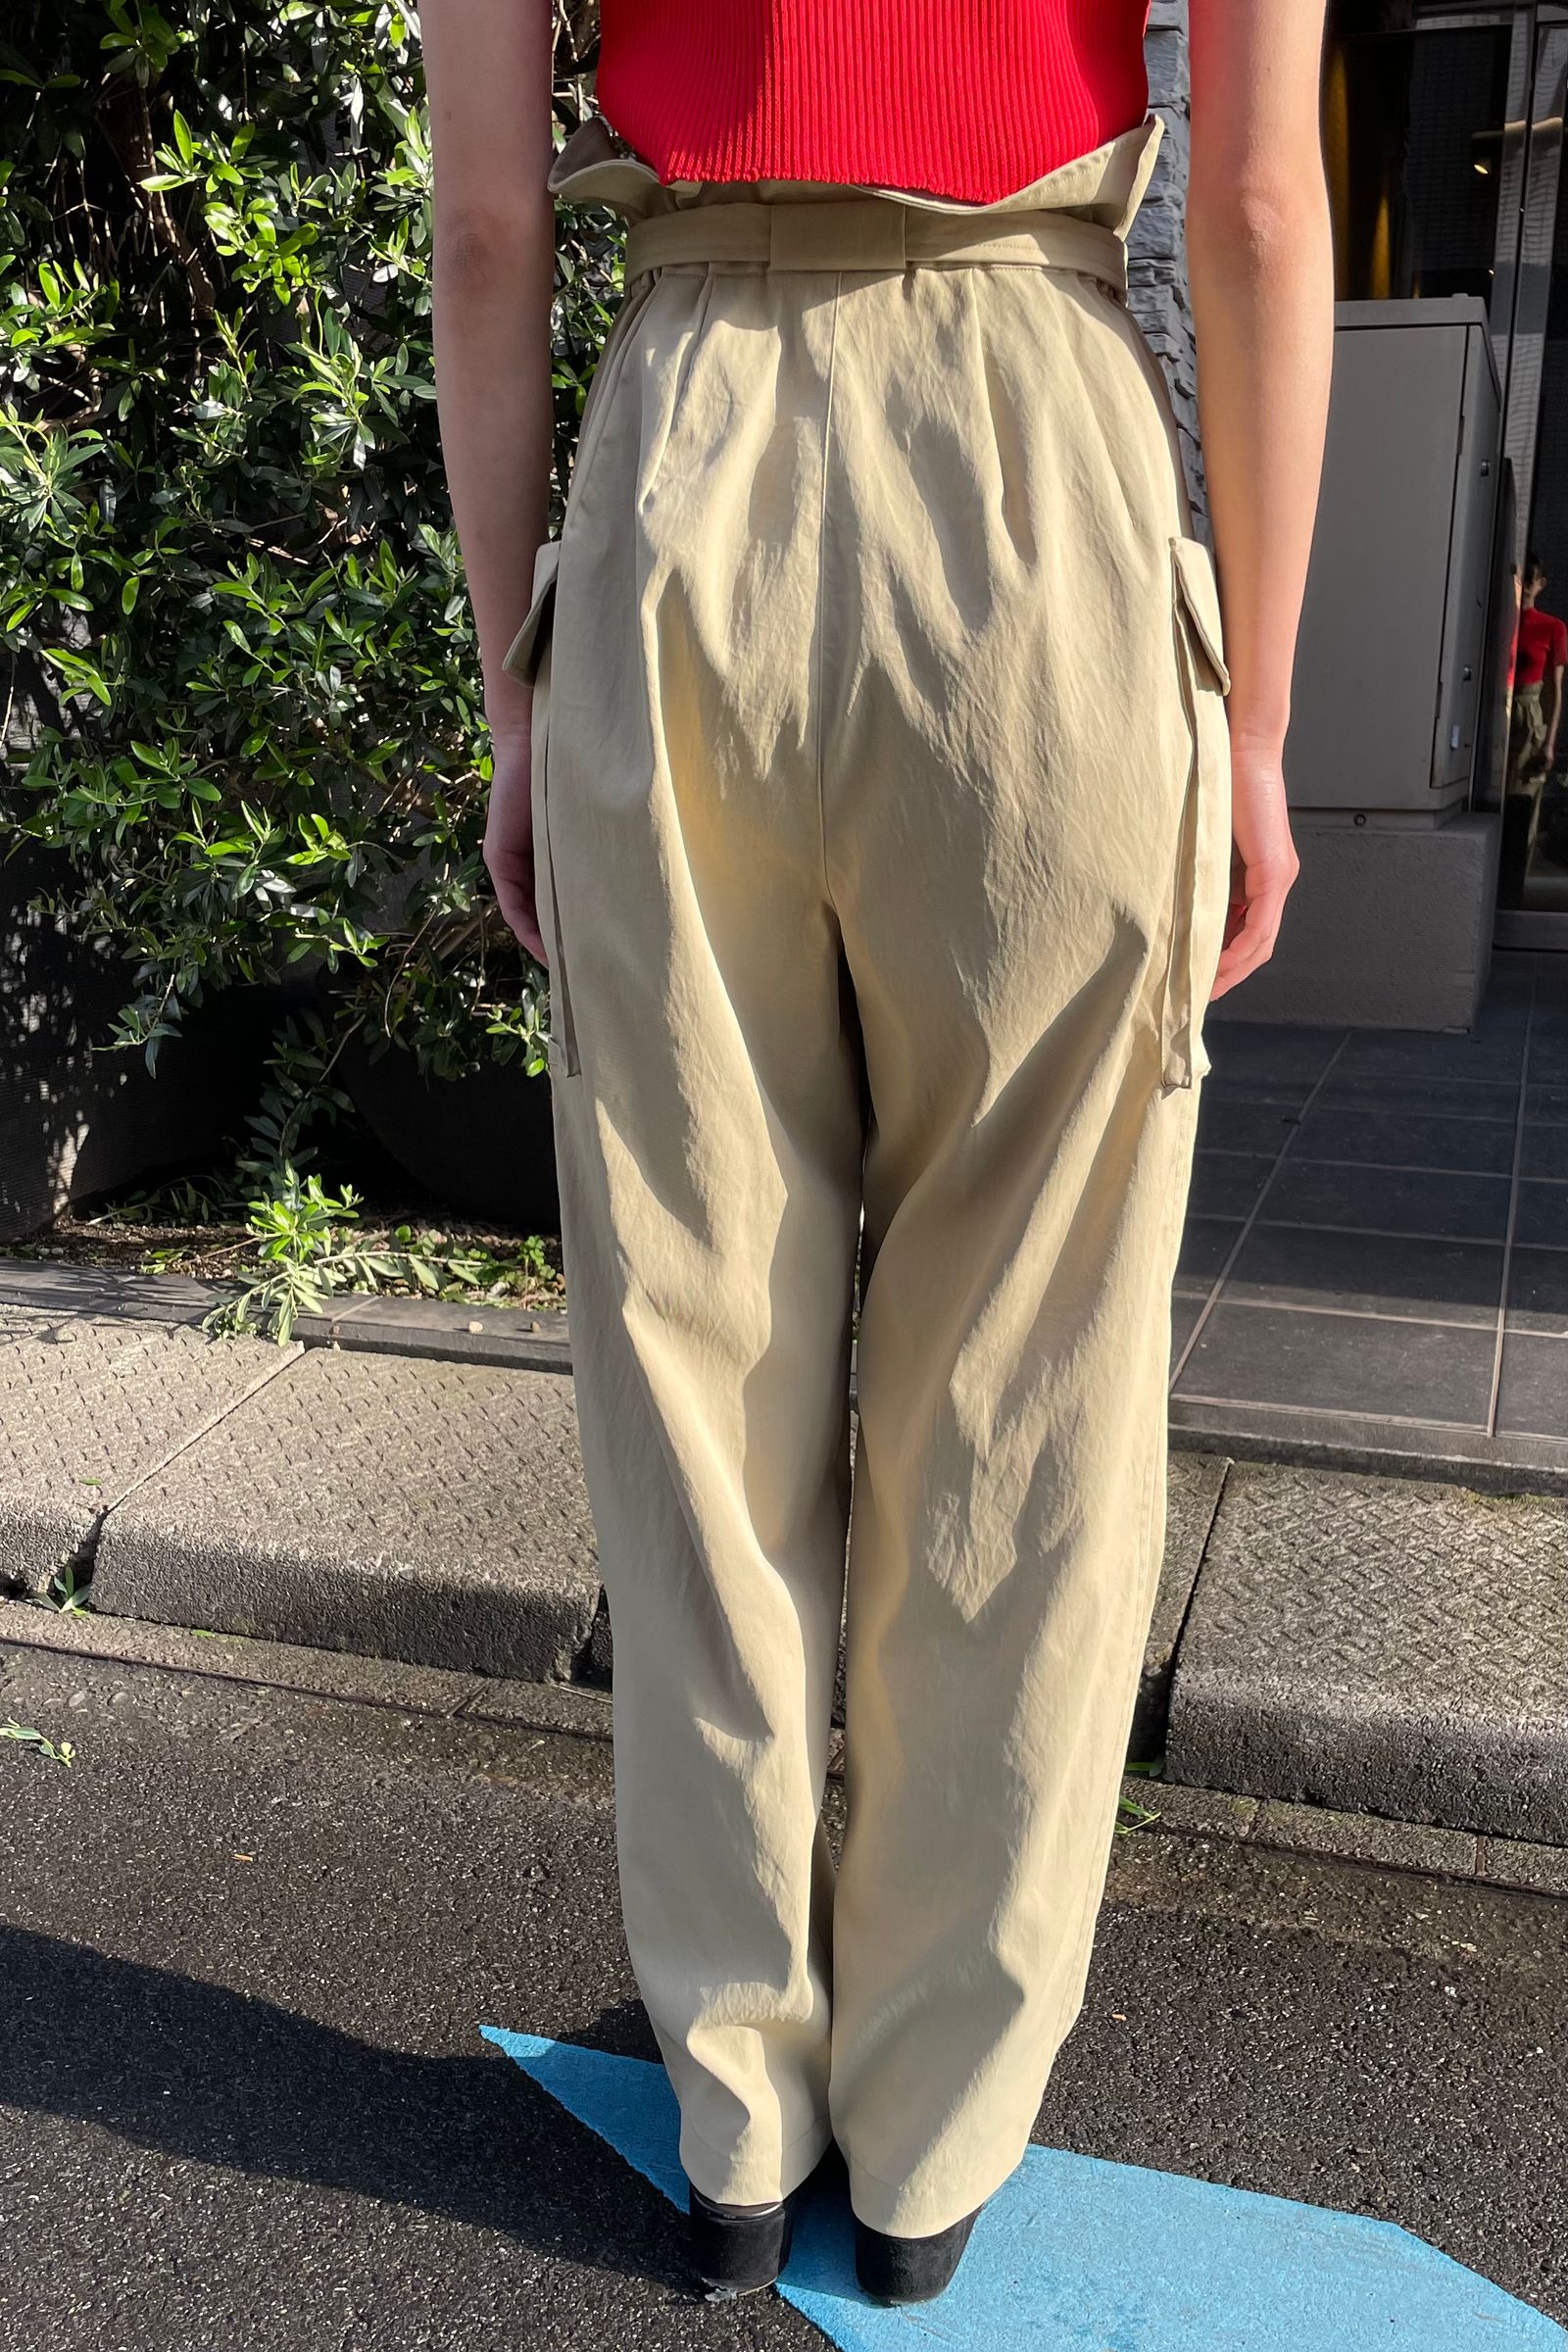 IIROT - high rise band pants -beige- 23ss | asterisk